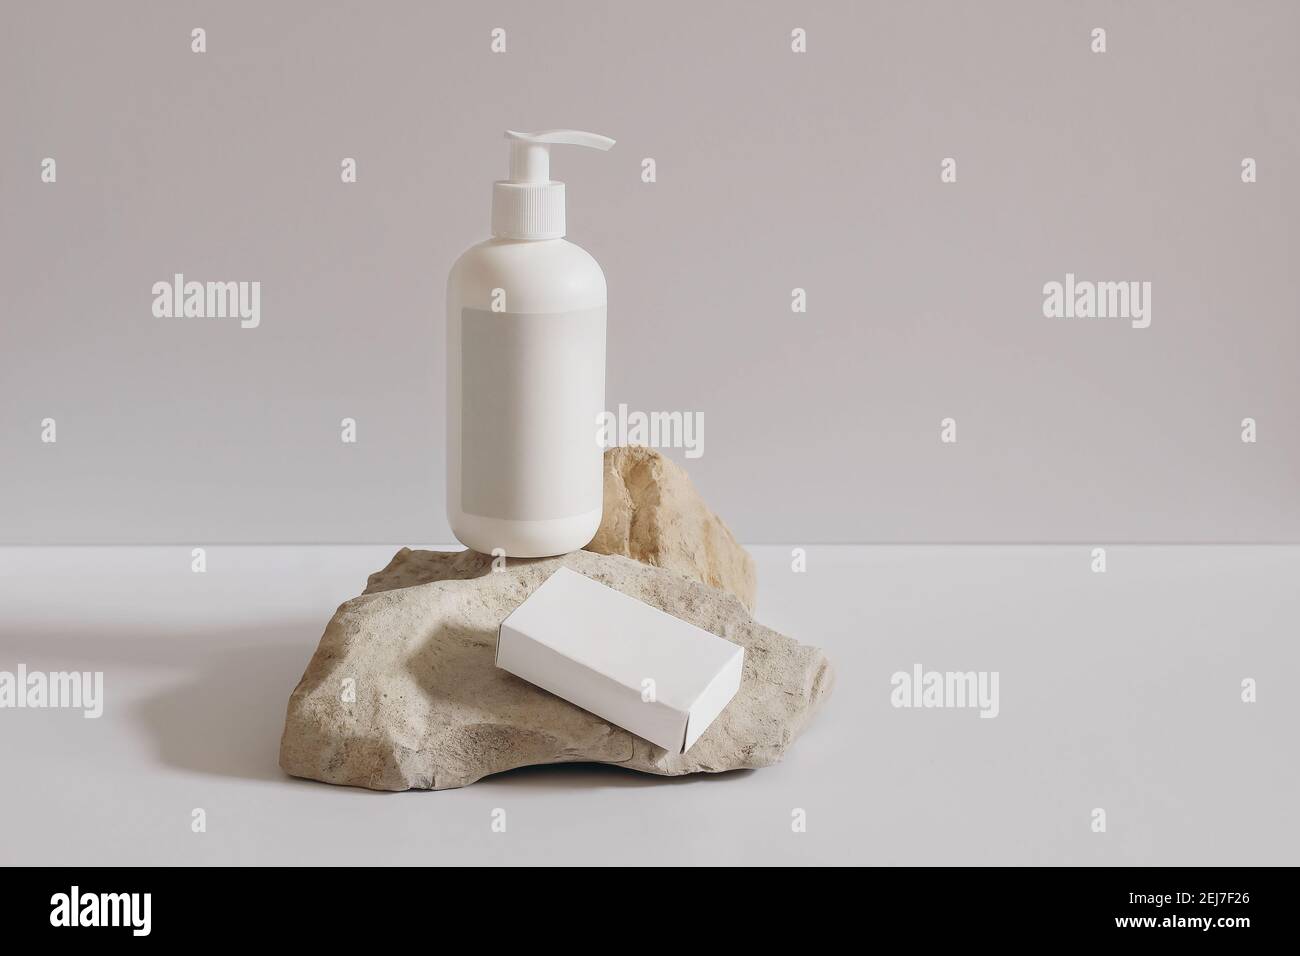 Collection of cosmetic products on beige background. White plastic pump bottle for shampoo, lotion mockup on stone podium. Blank soap paper box Stock Photo